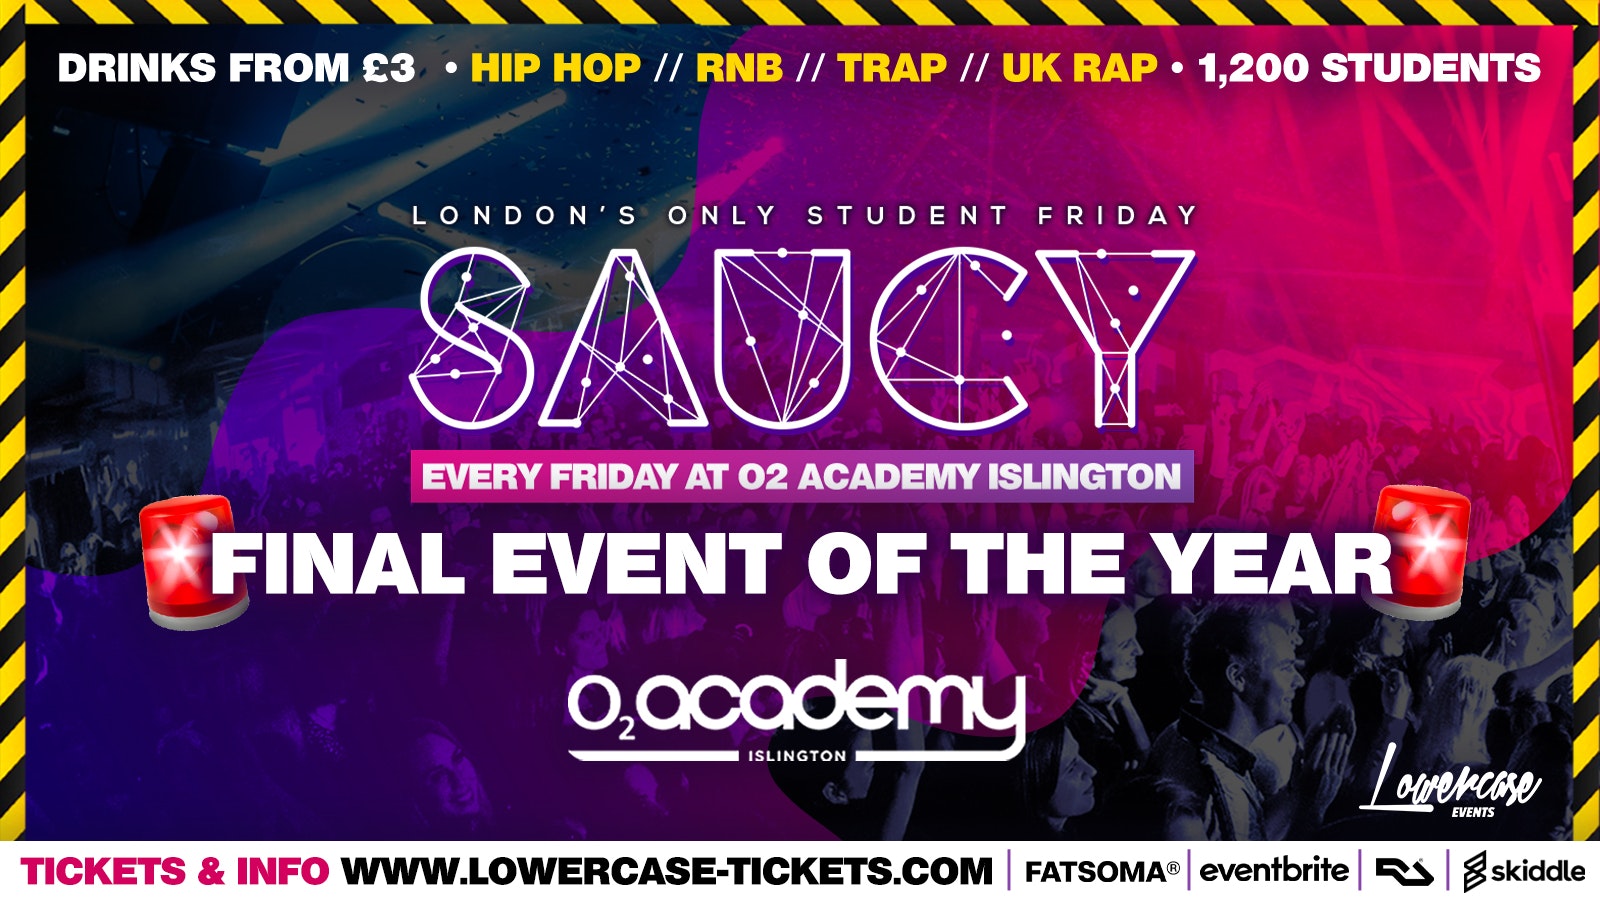 🚨FINAL EVENT OF THE YEAR 🚨- Saucy Fridays 🎉 – London’s Biggest Weekly Student Friday @ O2 Academy Islington ft DJ AR